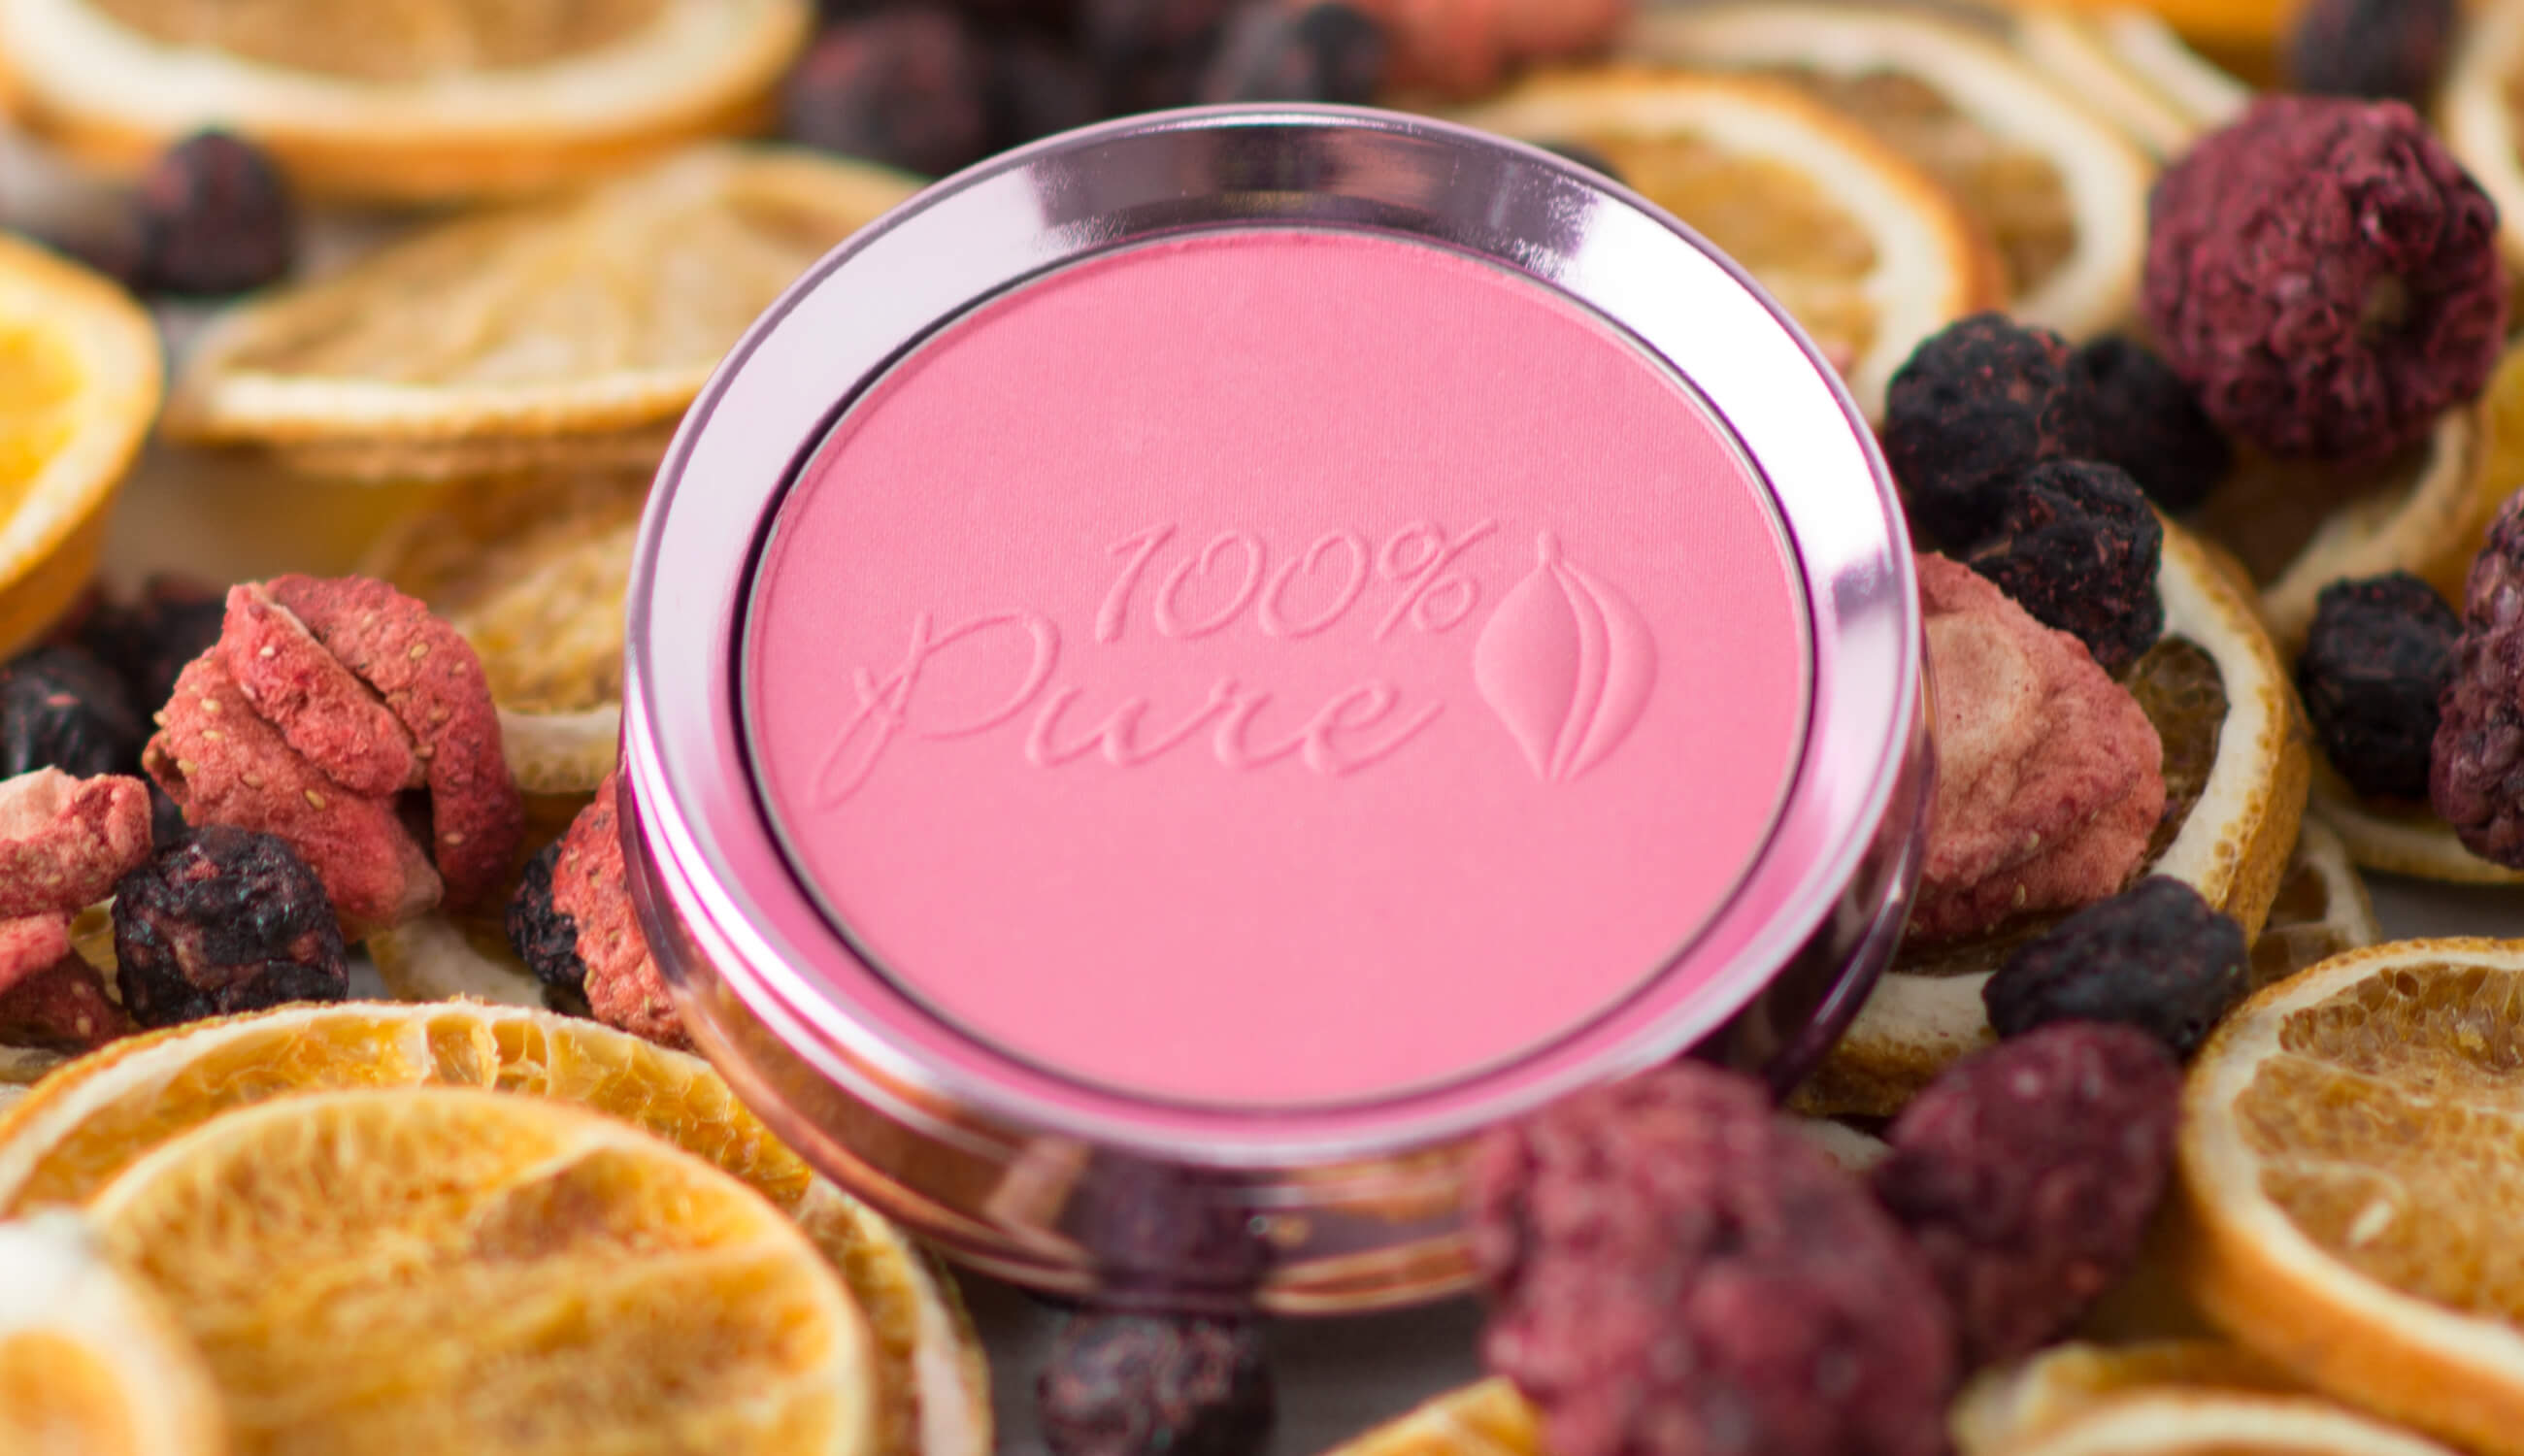 blush products